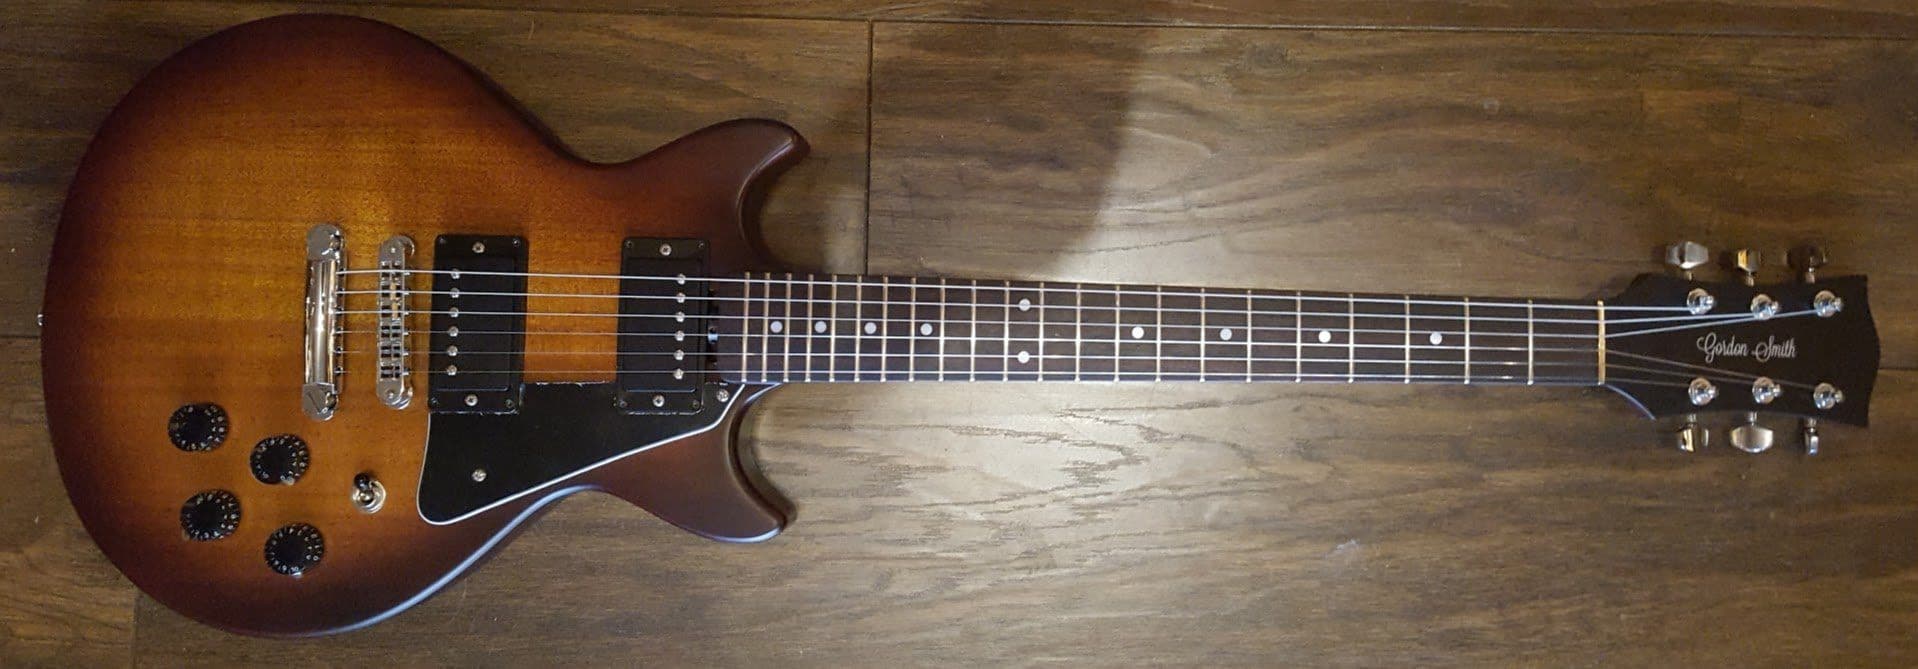 Copy of Gordon Smith GS2 Heritage Thick Body Full Mahogany (DAMAGED), Electric Guitar for sale at Richards Guitars.